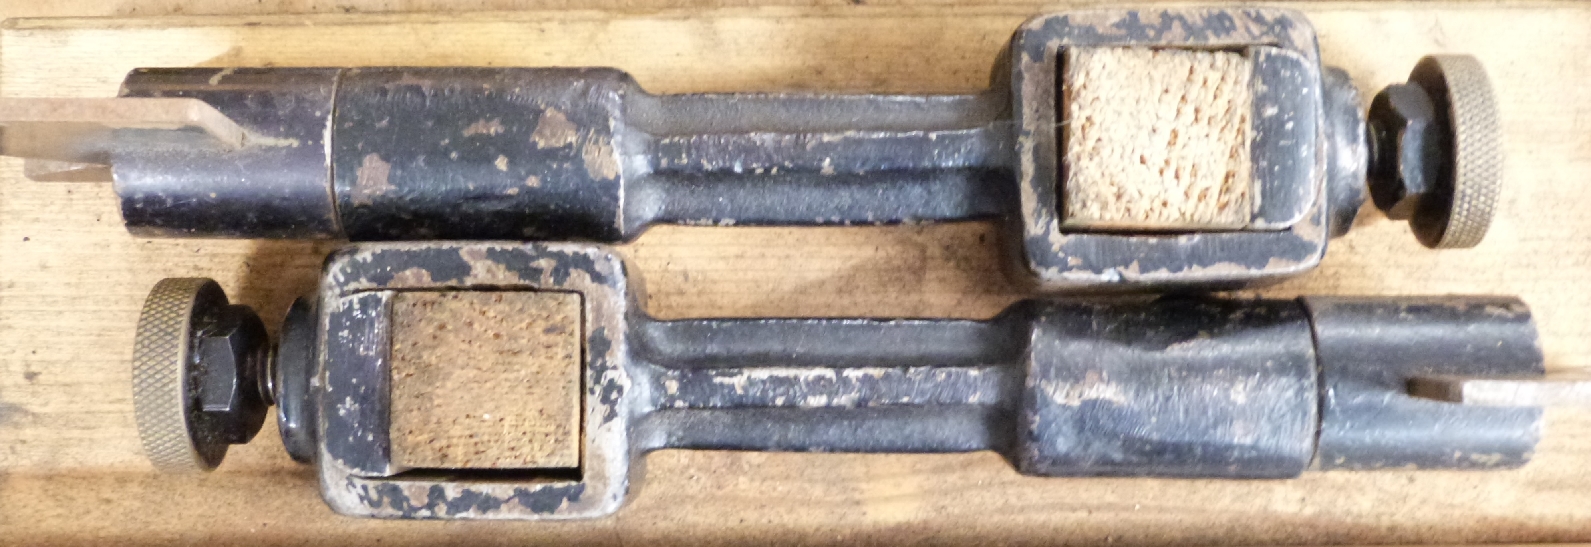 Vintage or classic car front axle alignment gauge in original box, possibly ex military - Image 2 of 4